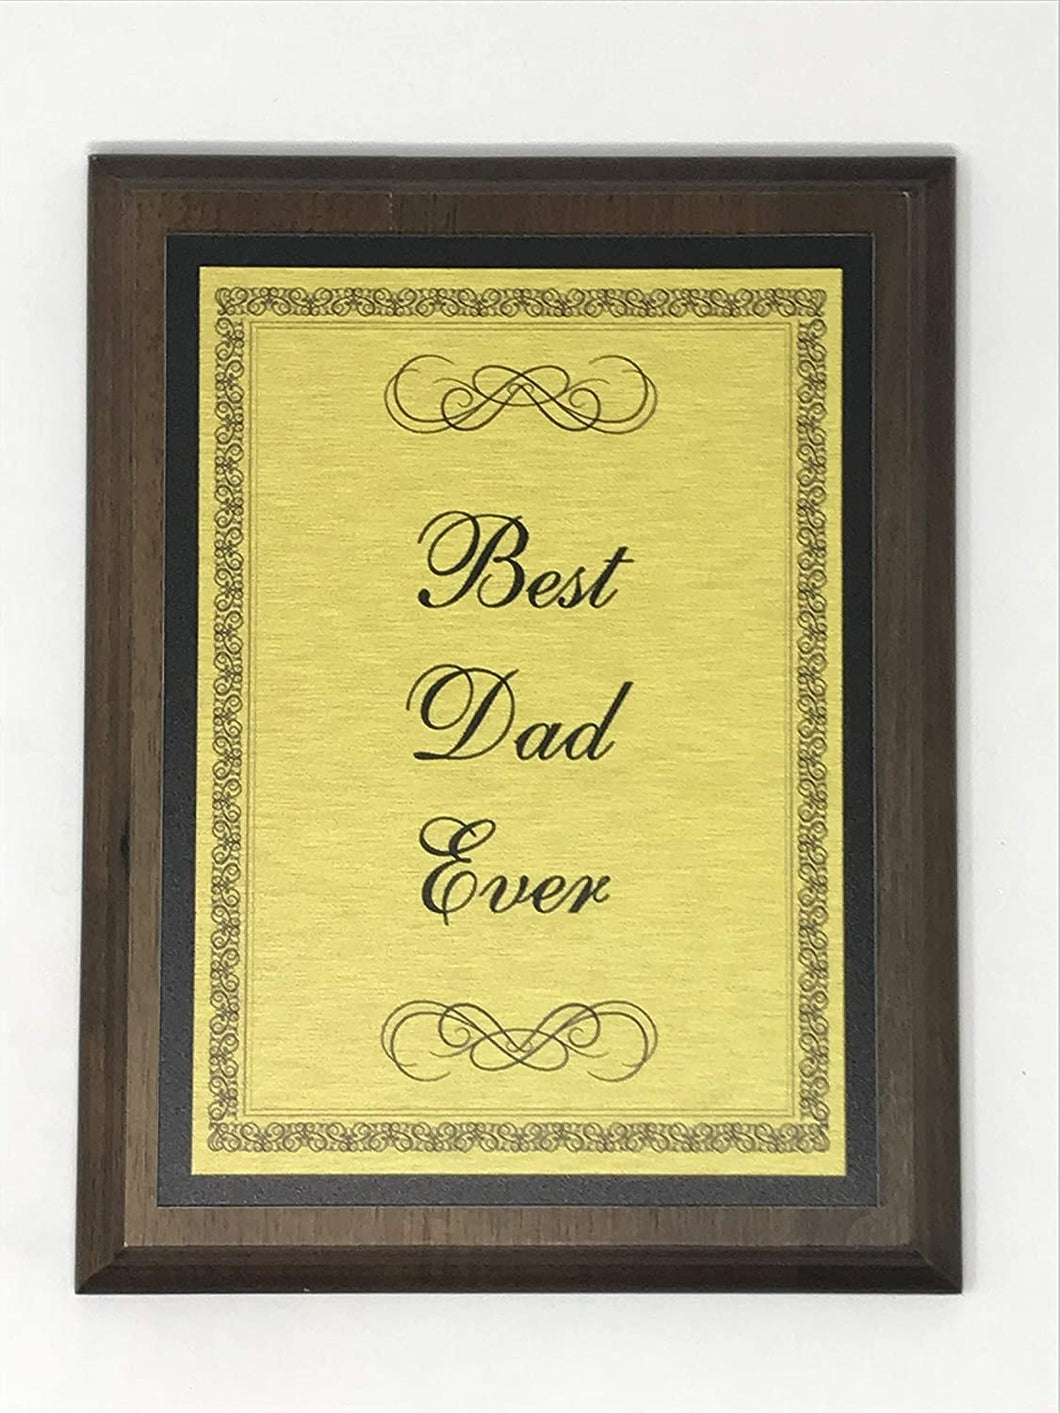 World's Greatest Plaques (Best Dad Ever, Gold)…